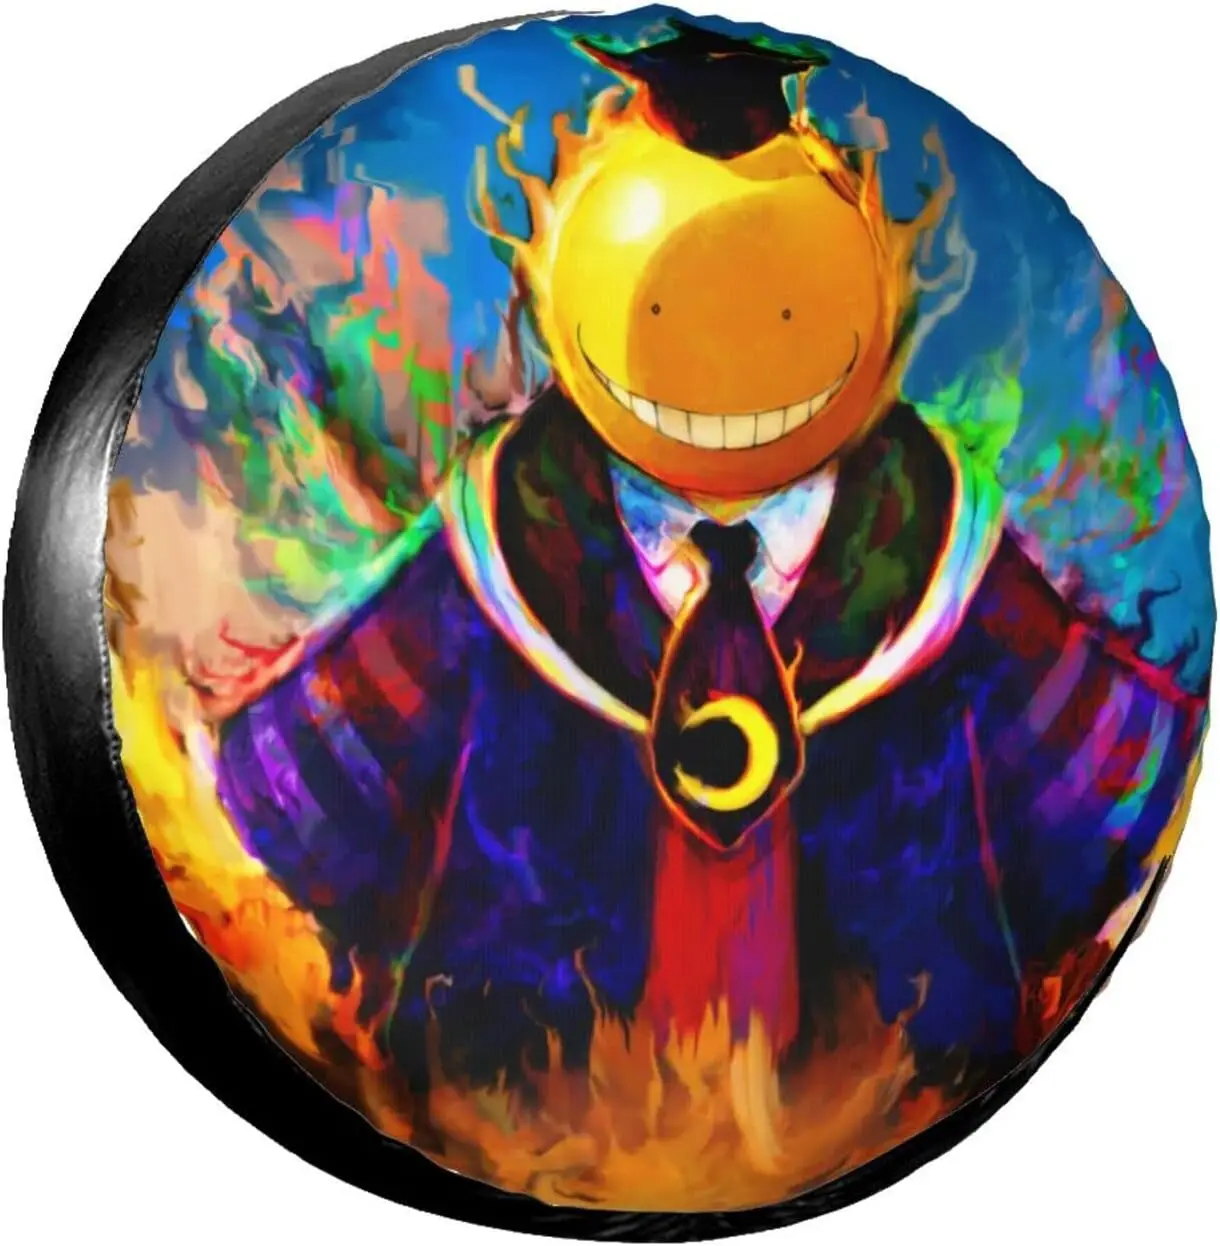 

Anime Assassination Classroom Spare Car Tire Cover Wheel Protectors Water Dustproof Universal Fit for SUV Truck Camper Travel